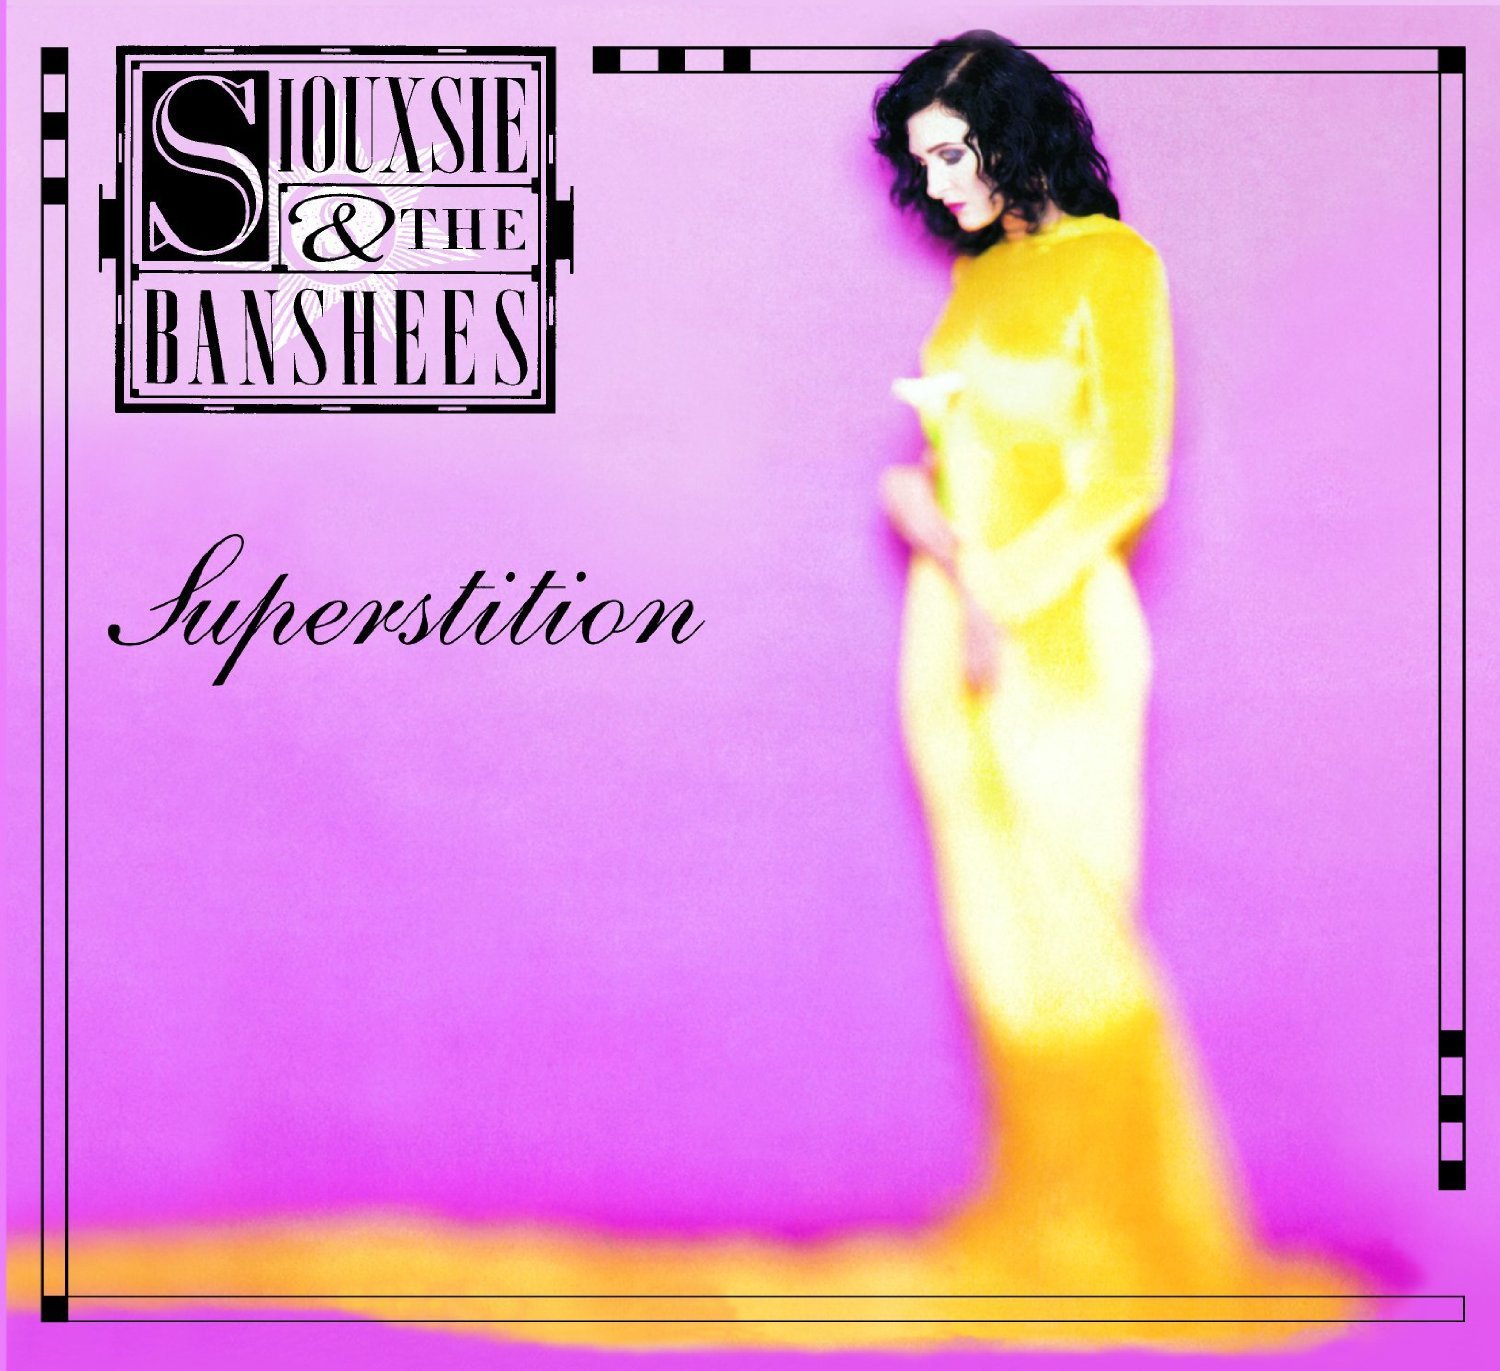 Siouxsie and the Banshees - Superstition (Music CD)